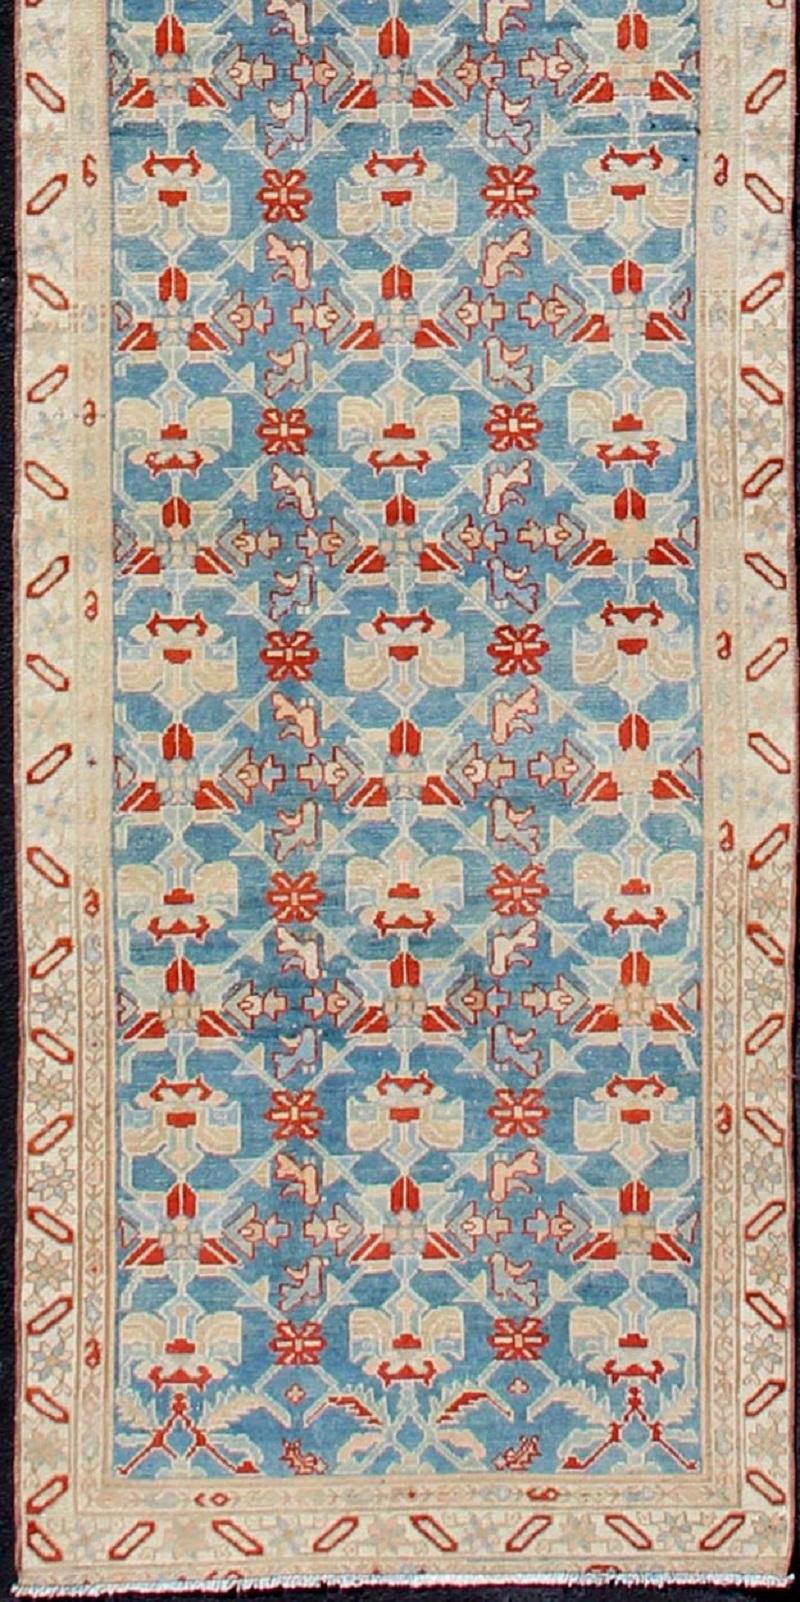 Blue, red, and nude Antique Malayer long runner from Persia with all-over repeating design, rug sk-7467, country of origin / type: Iran / Malayer, circa 1910.l

This magnificent antique Persian Malayer long runner (circa 1910) bears a beautiful,